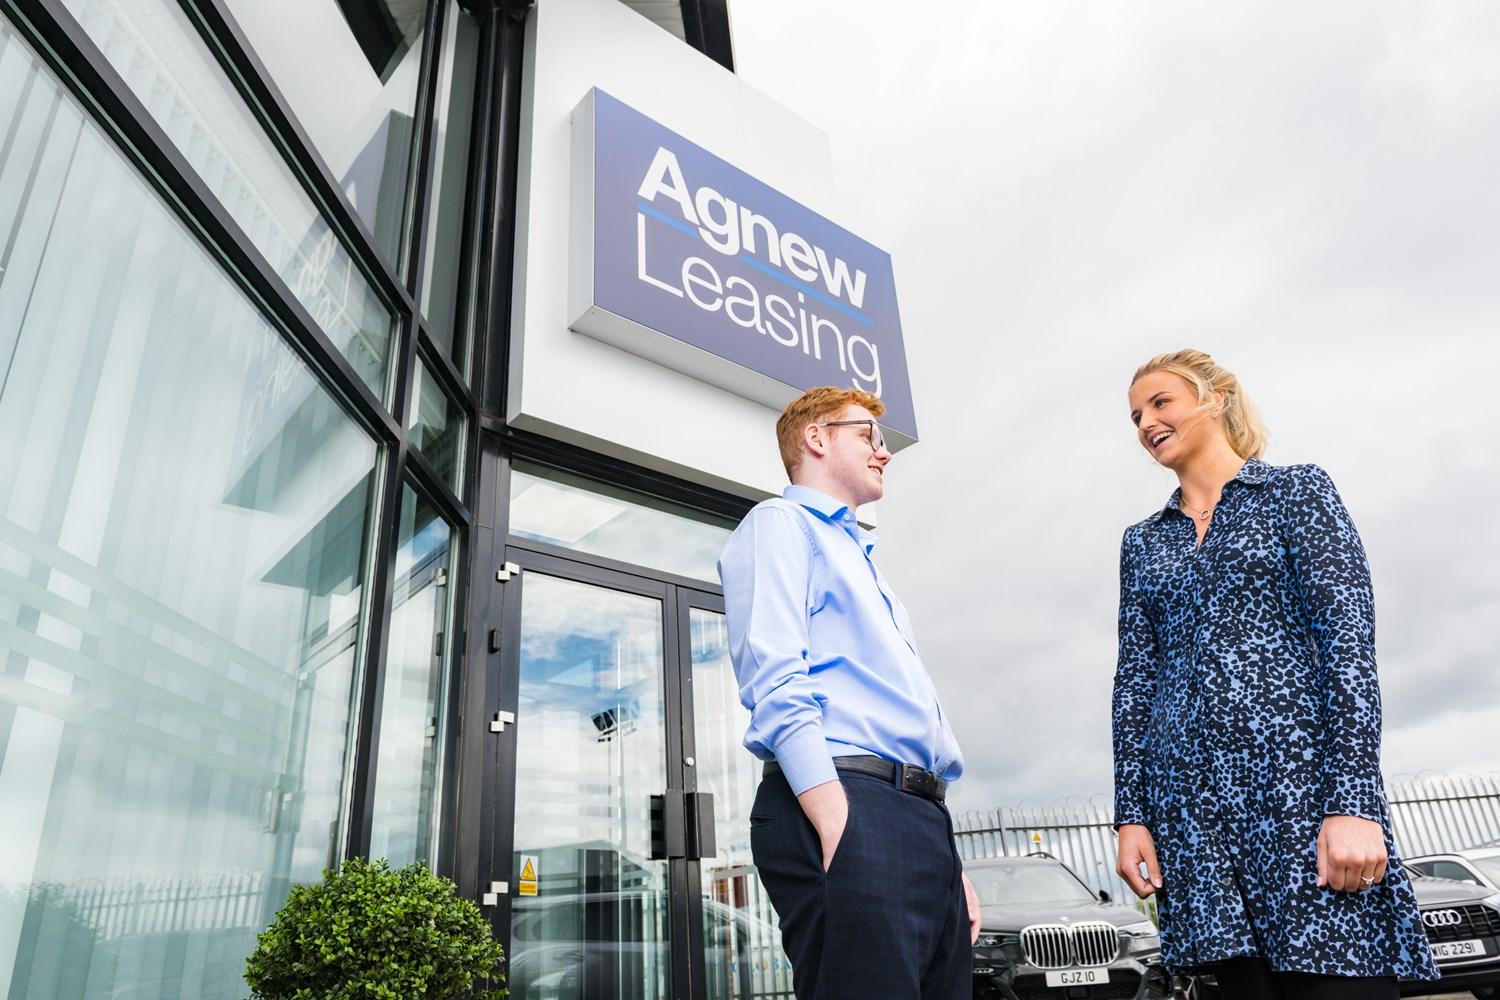 Agnew Leasing staff greeting customer outside our car leasing department in Belfast